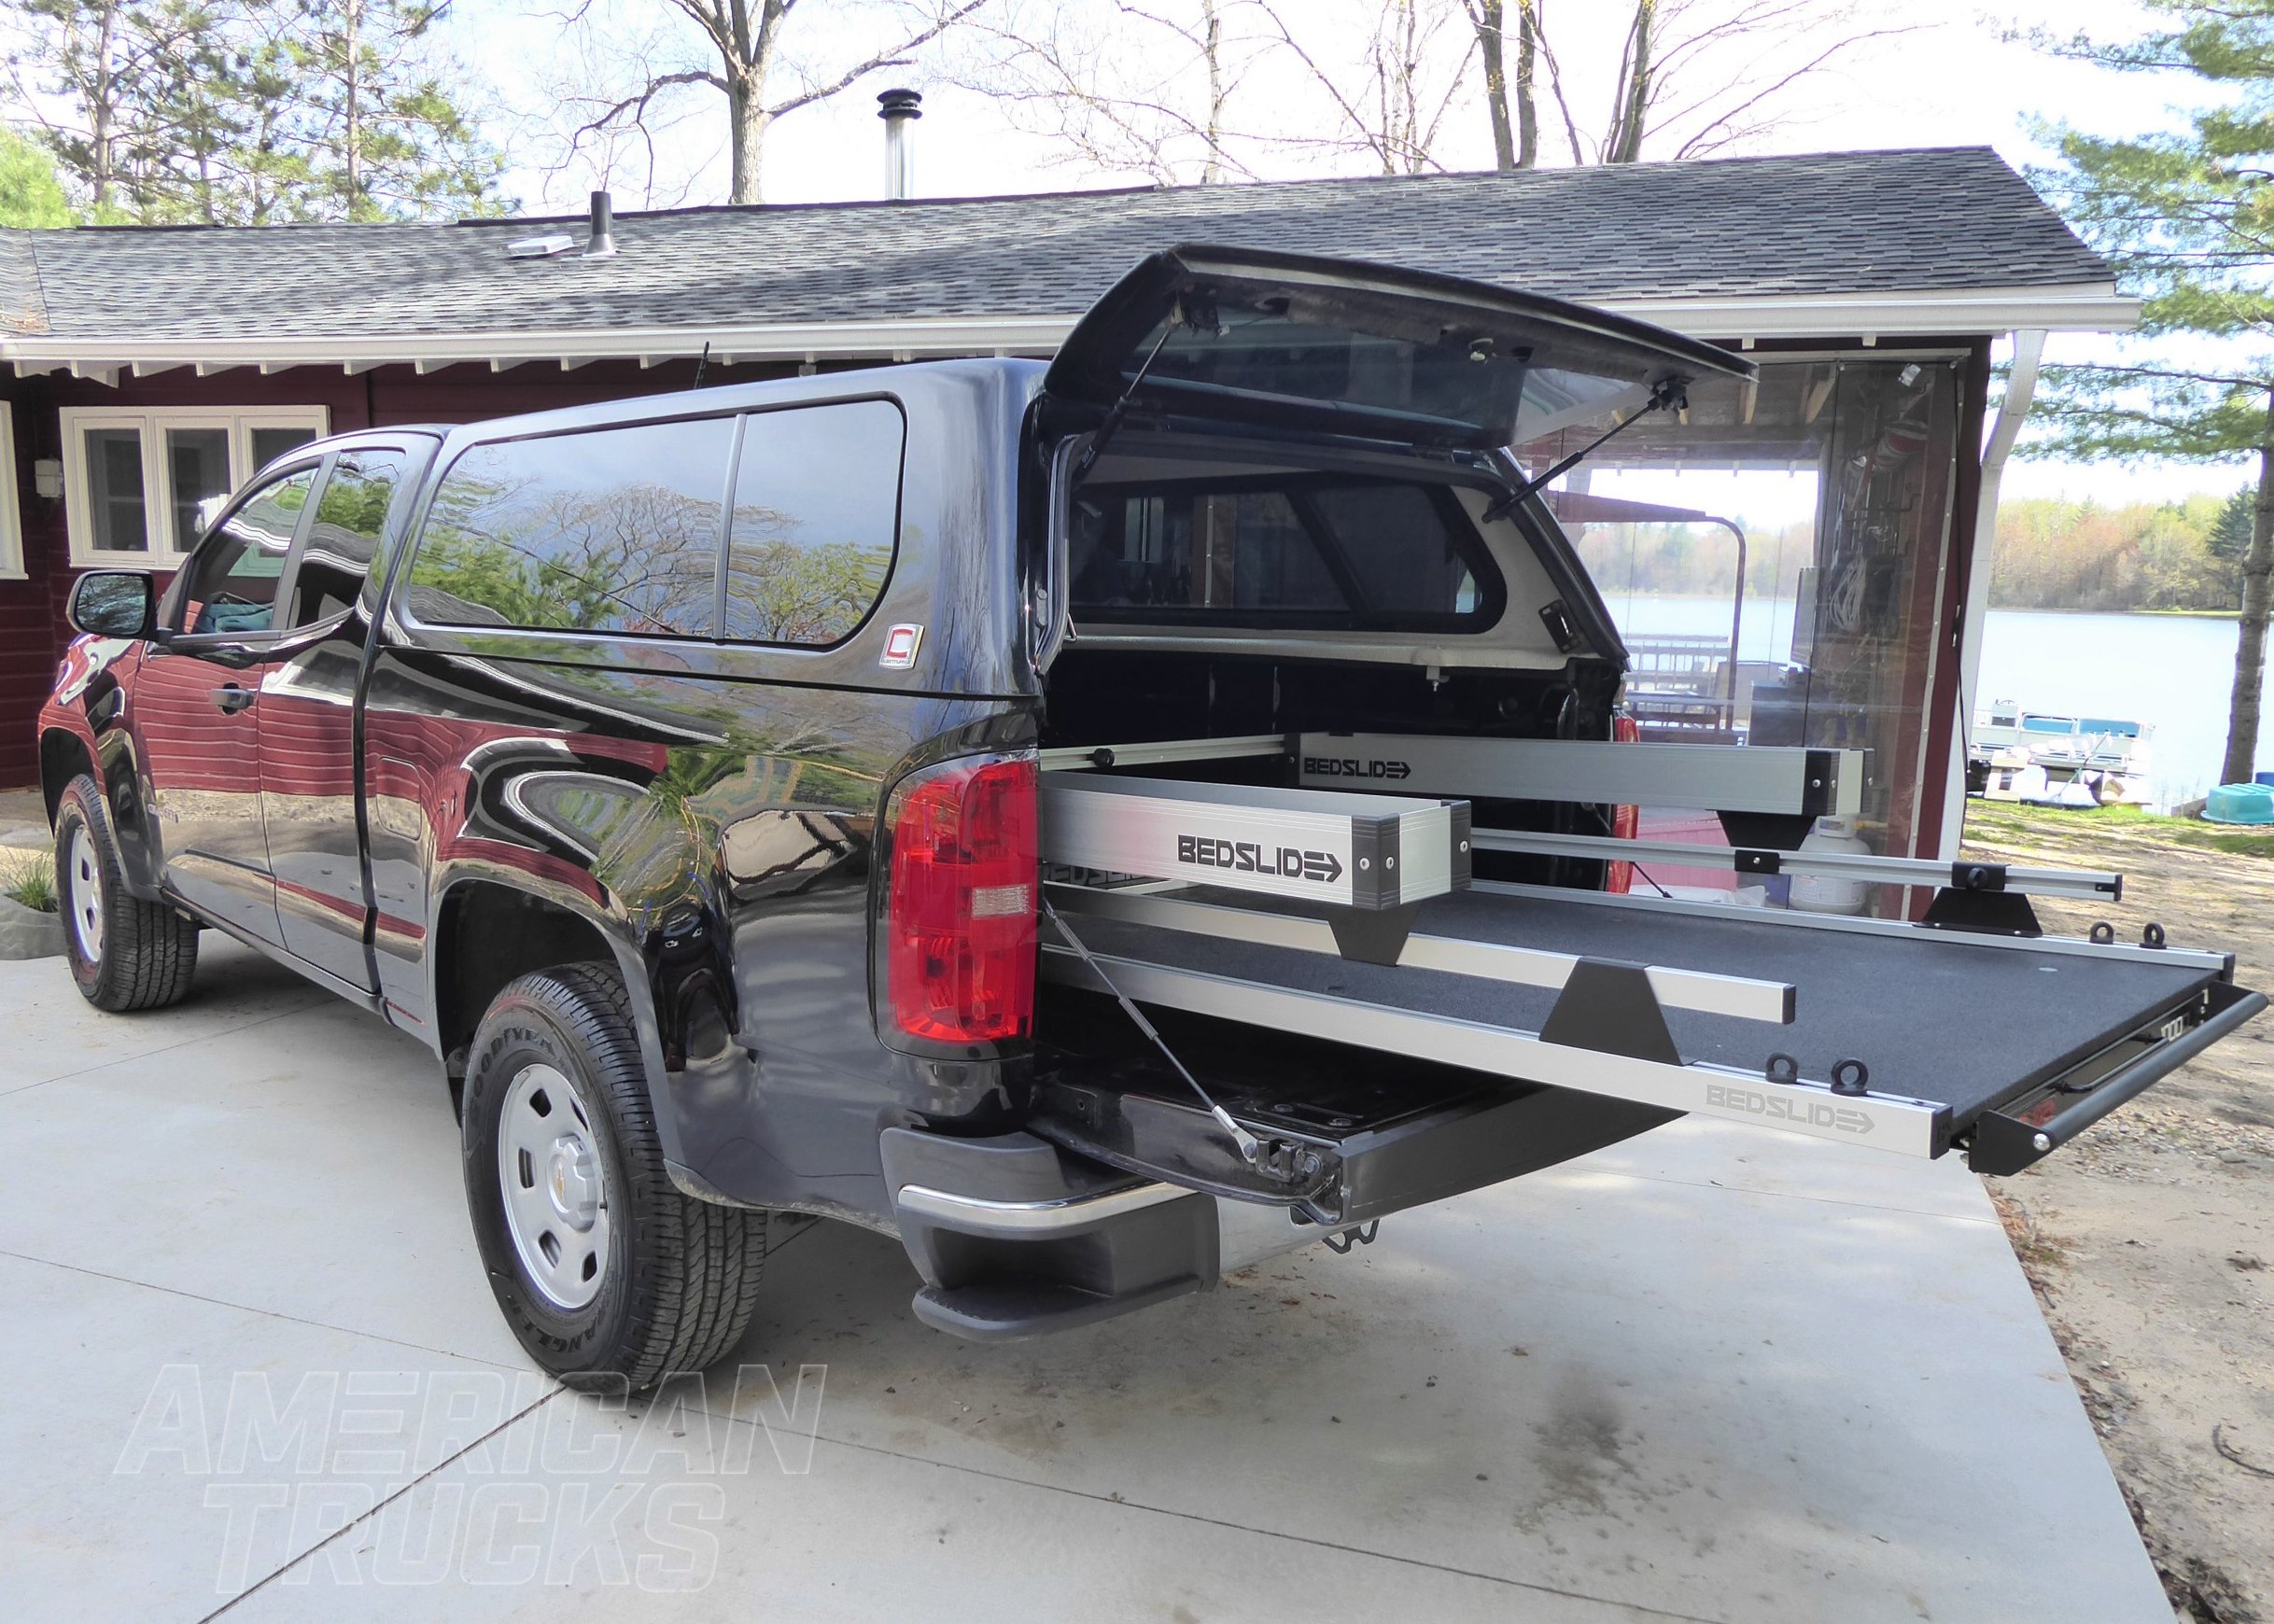 2005 Silverado Fitted with a BedSlide Storage System